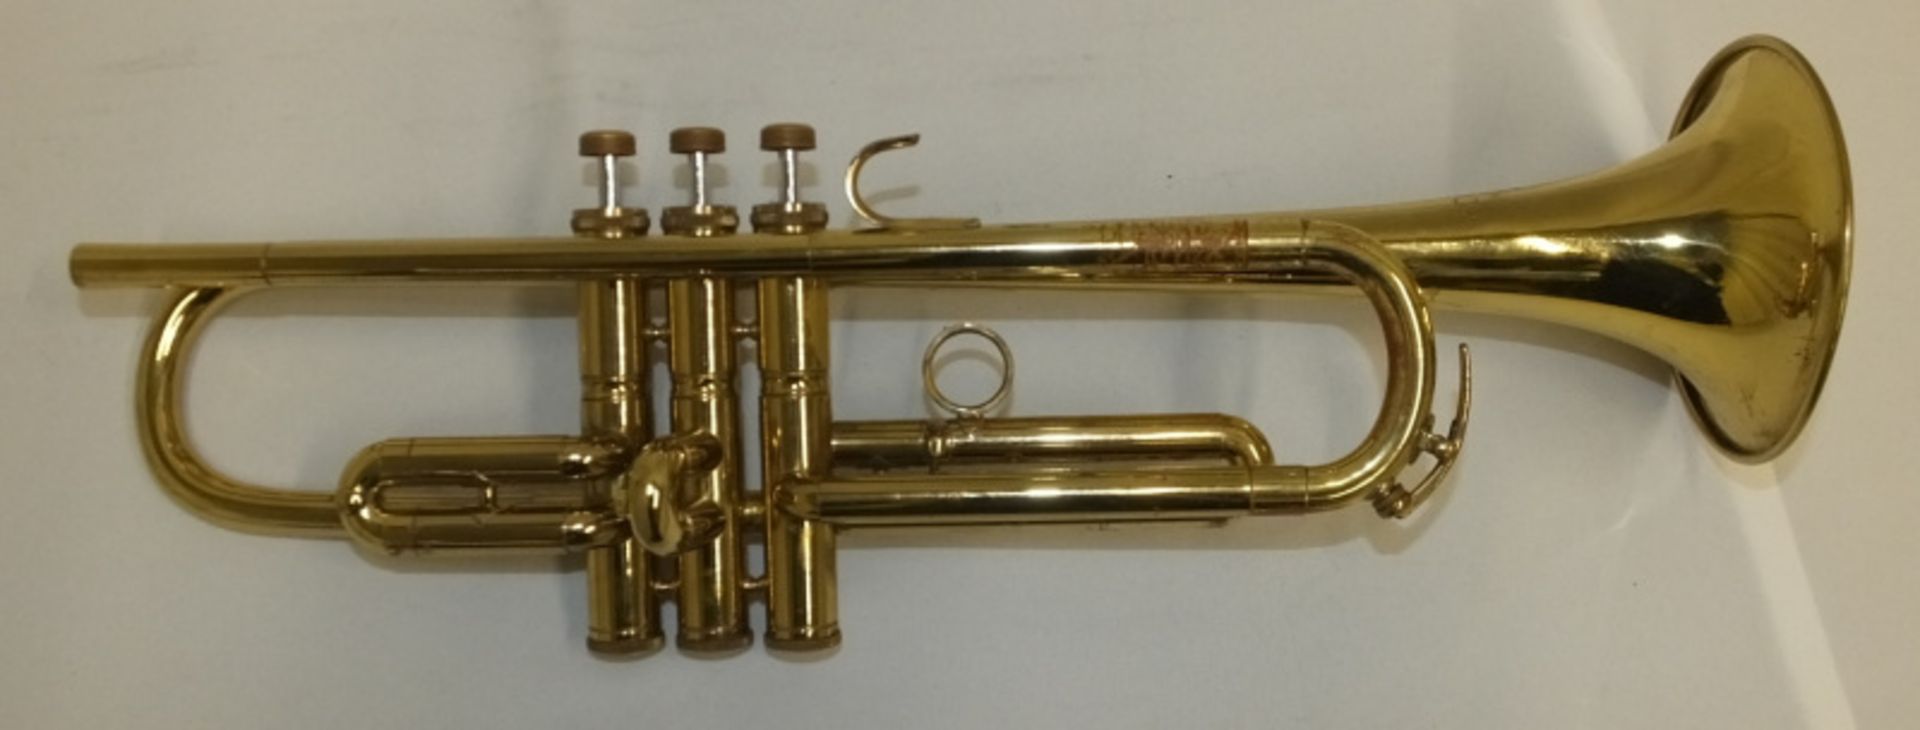 Corton 80 Trumpet in case - serial number 056228 - Please check photos carefully - Image 4 of 11